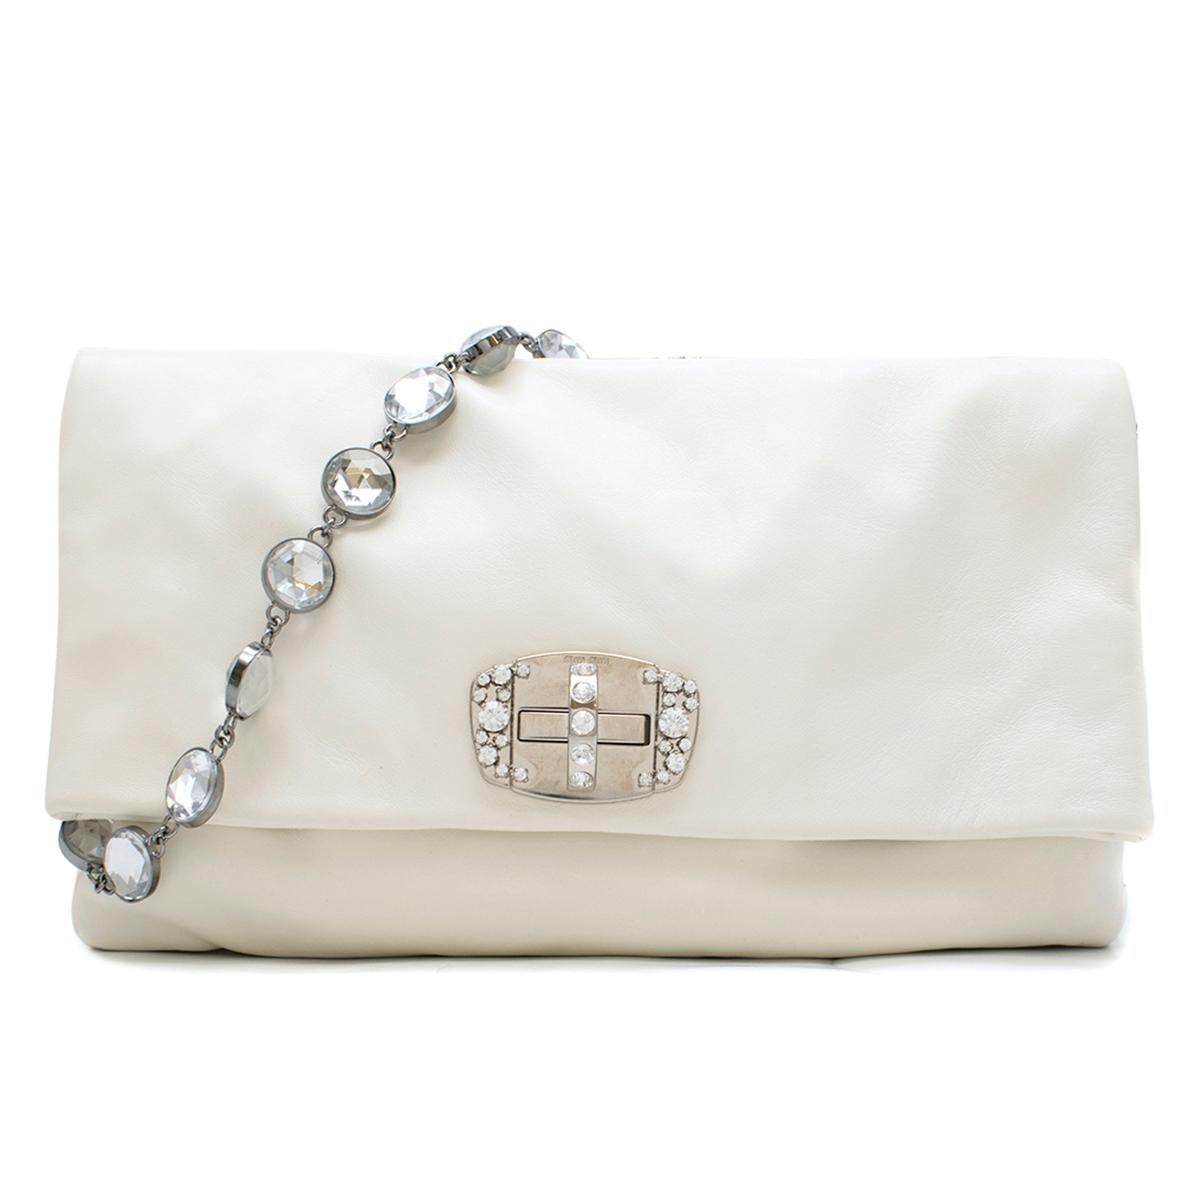 Miu Miu White Leather Crystal Foldover Shoulder Bag 

-Leather, white
-Crystal strap
-Crystal and sliver metal hardware closure on flap compartment
-Zip opening on main compartment 
-Black Interior lining
-